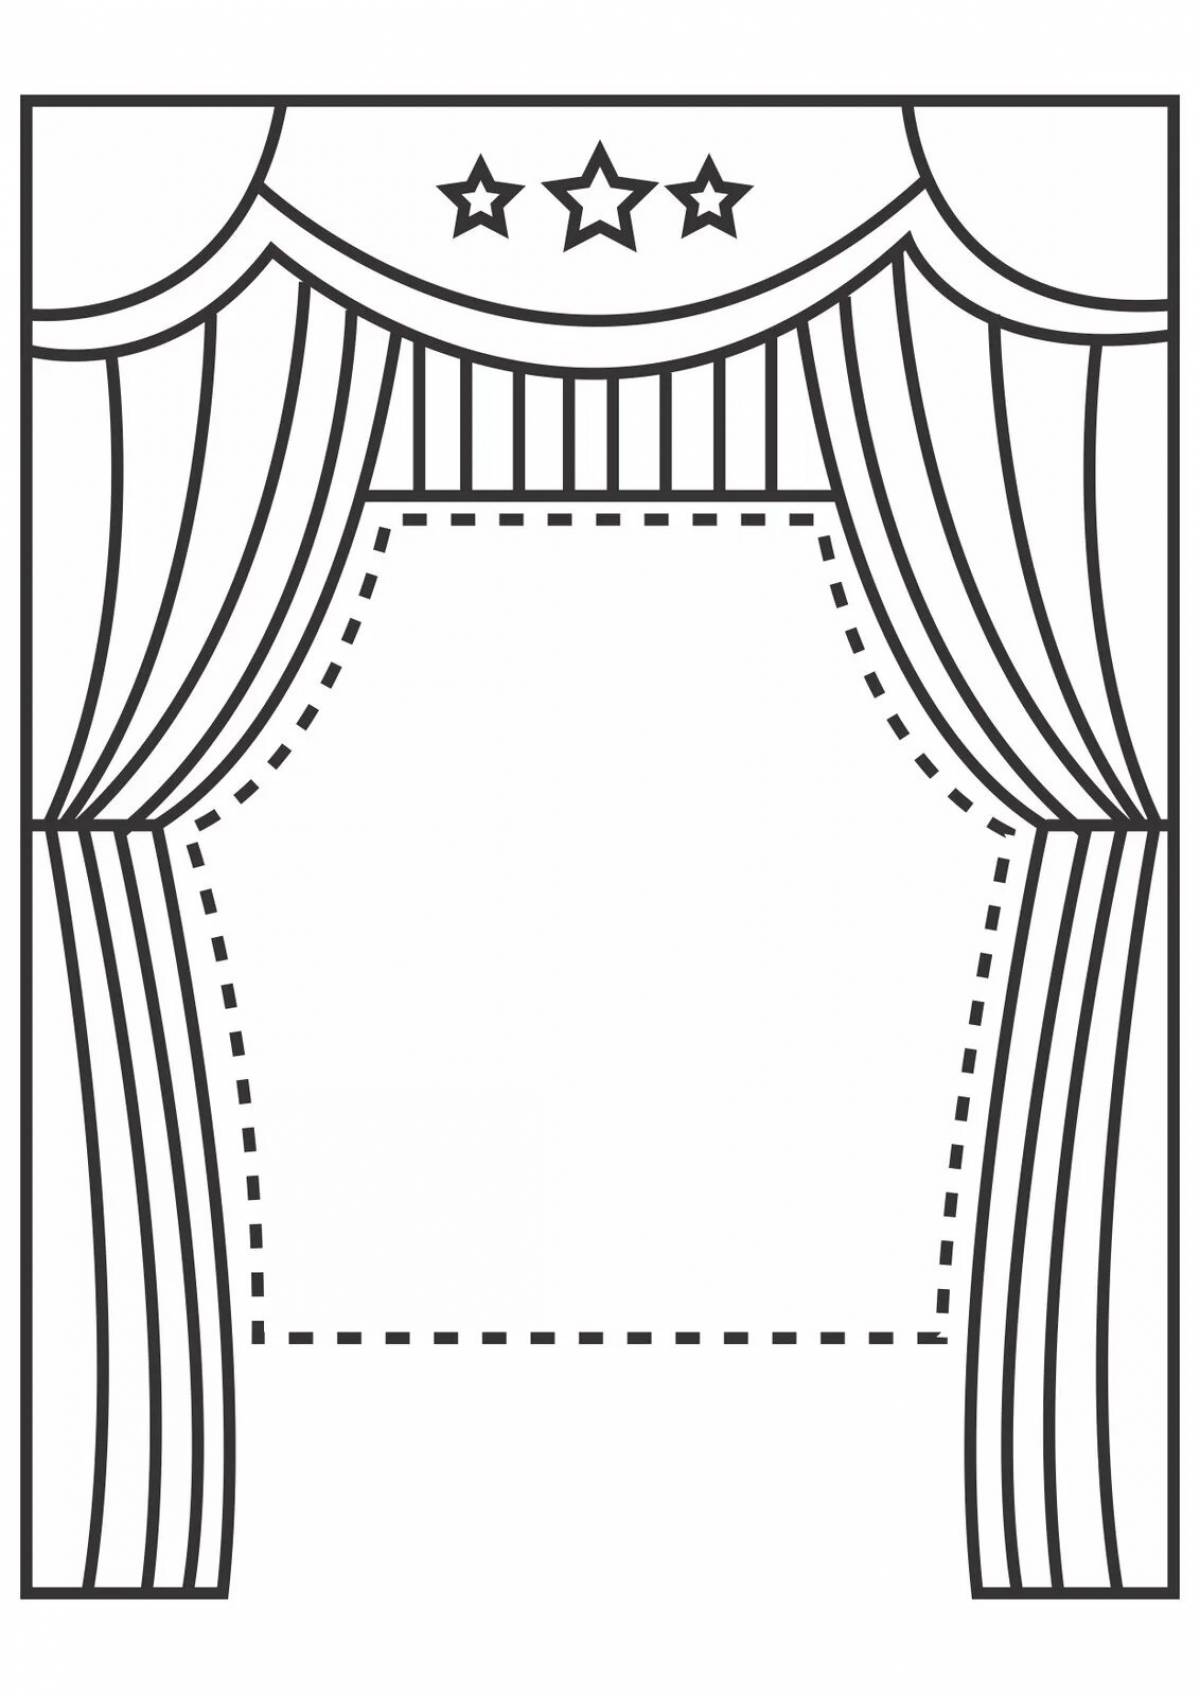 Inviting theater stage coloring book